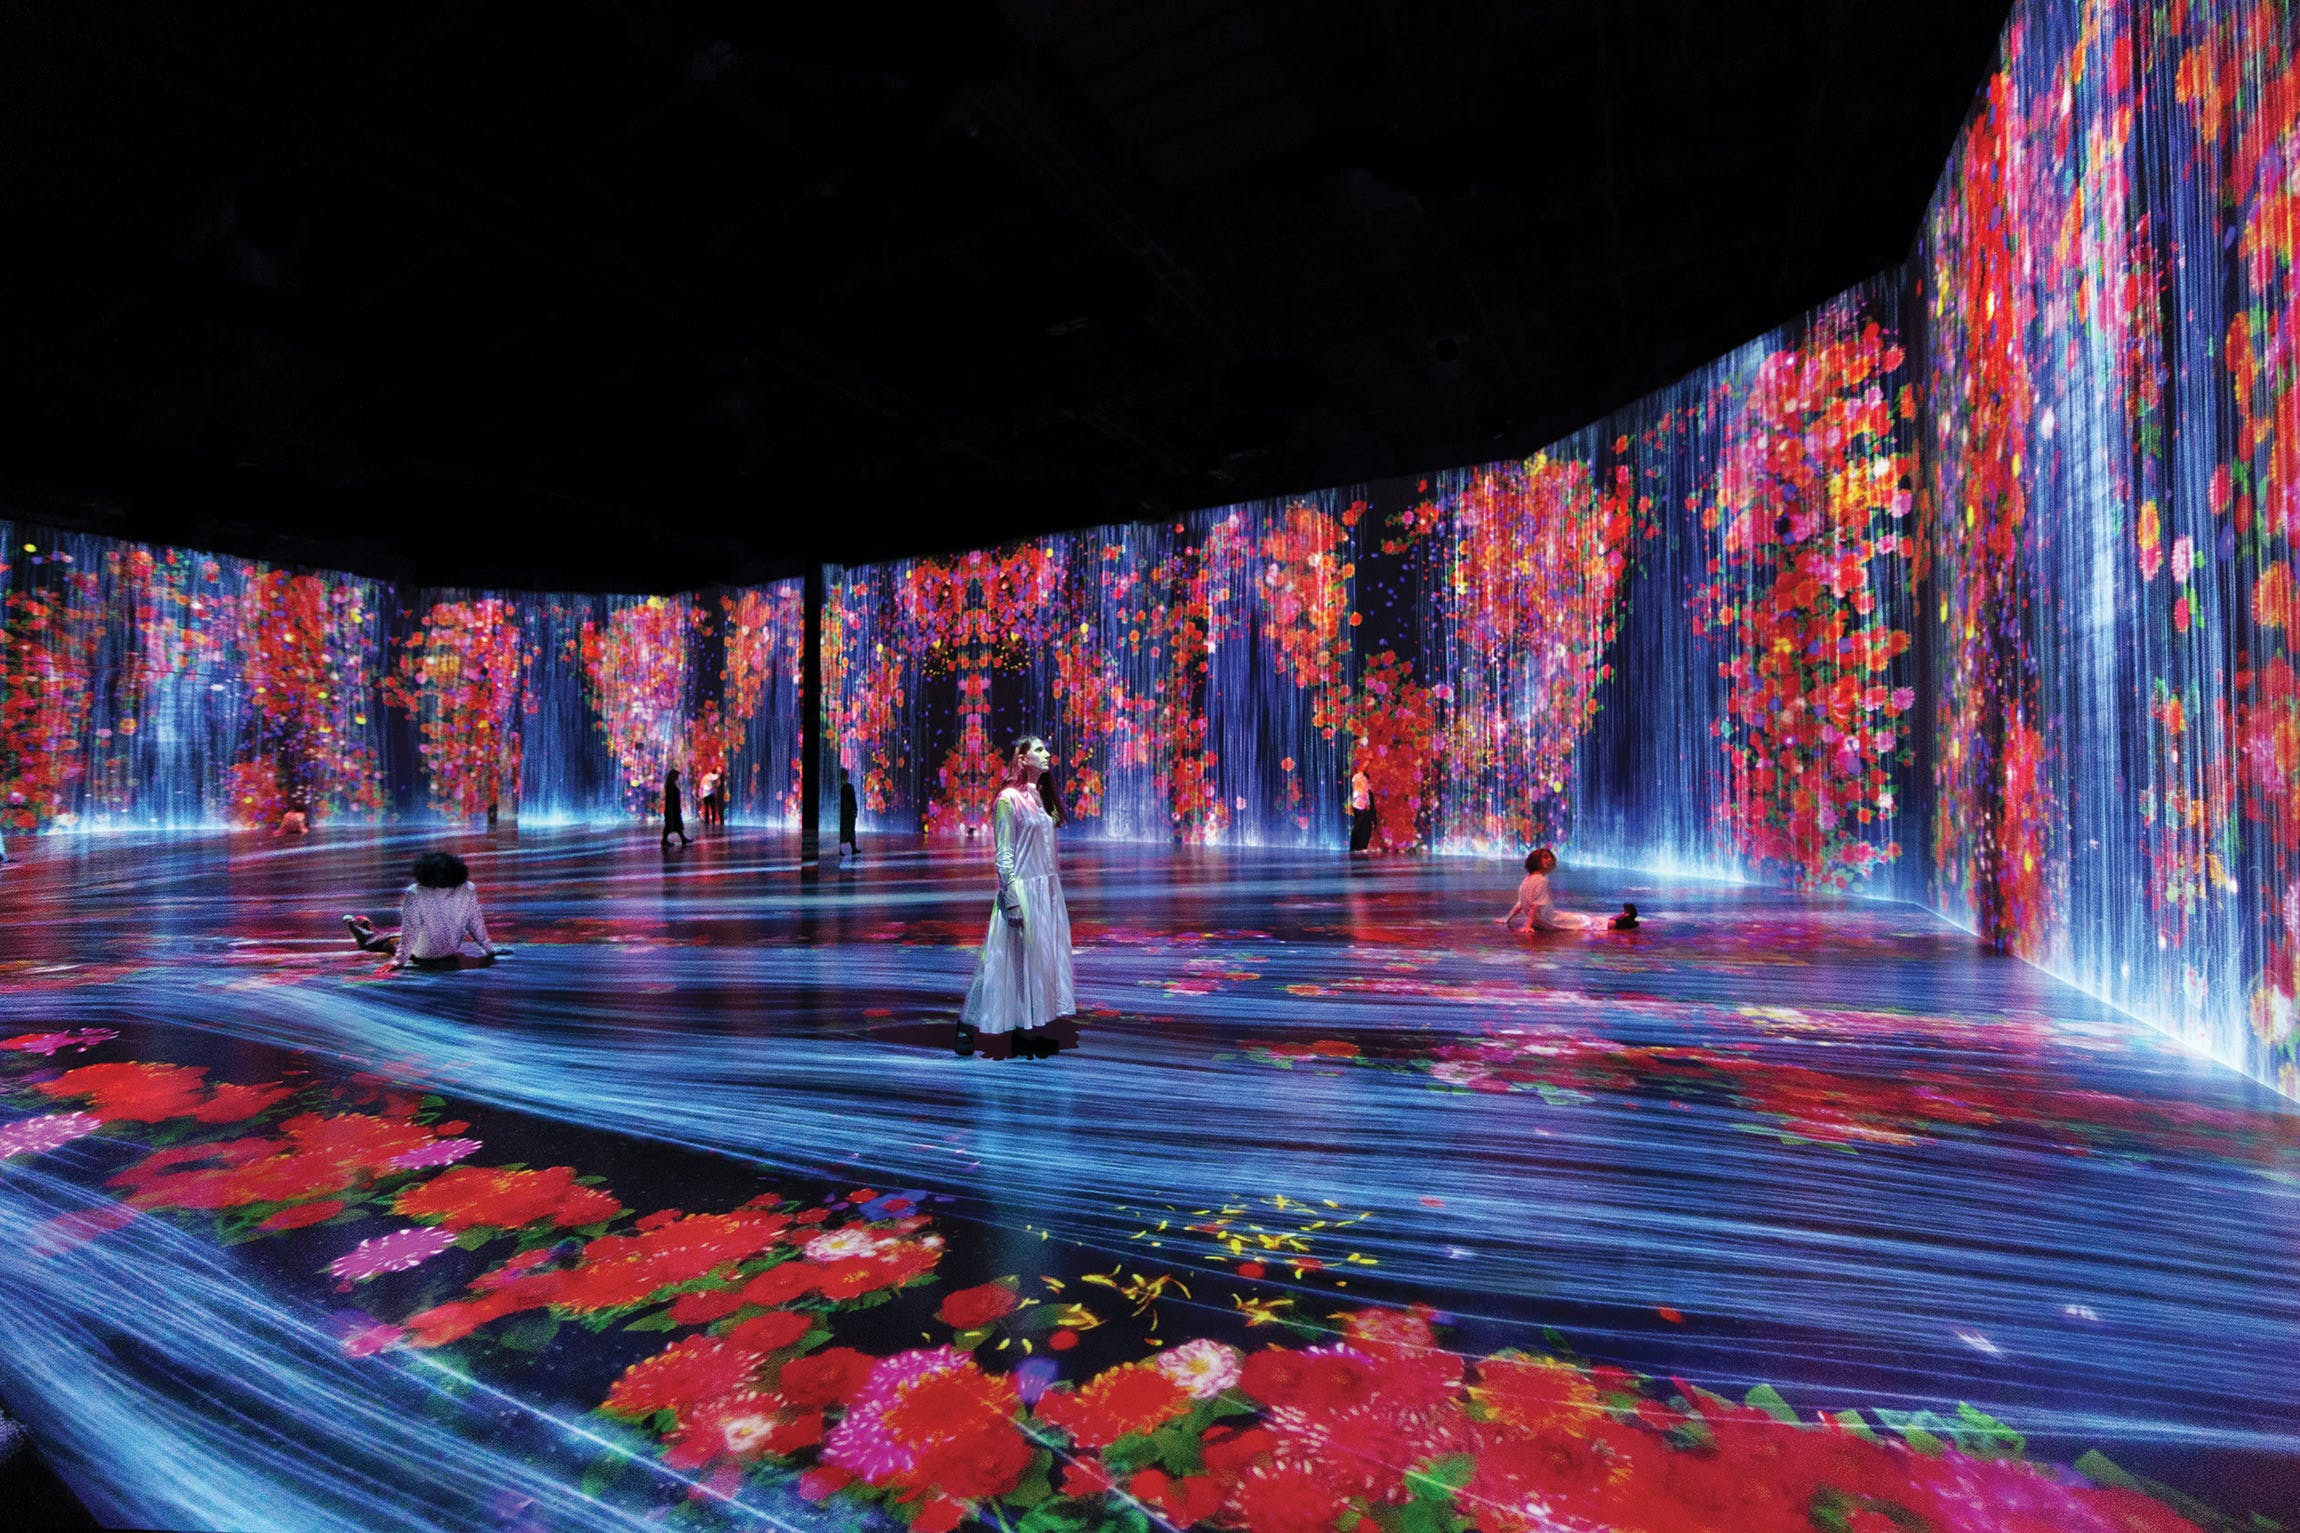 The Immersive Art Experience: Are Attractions Considered Art?